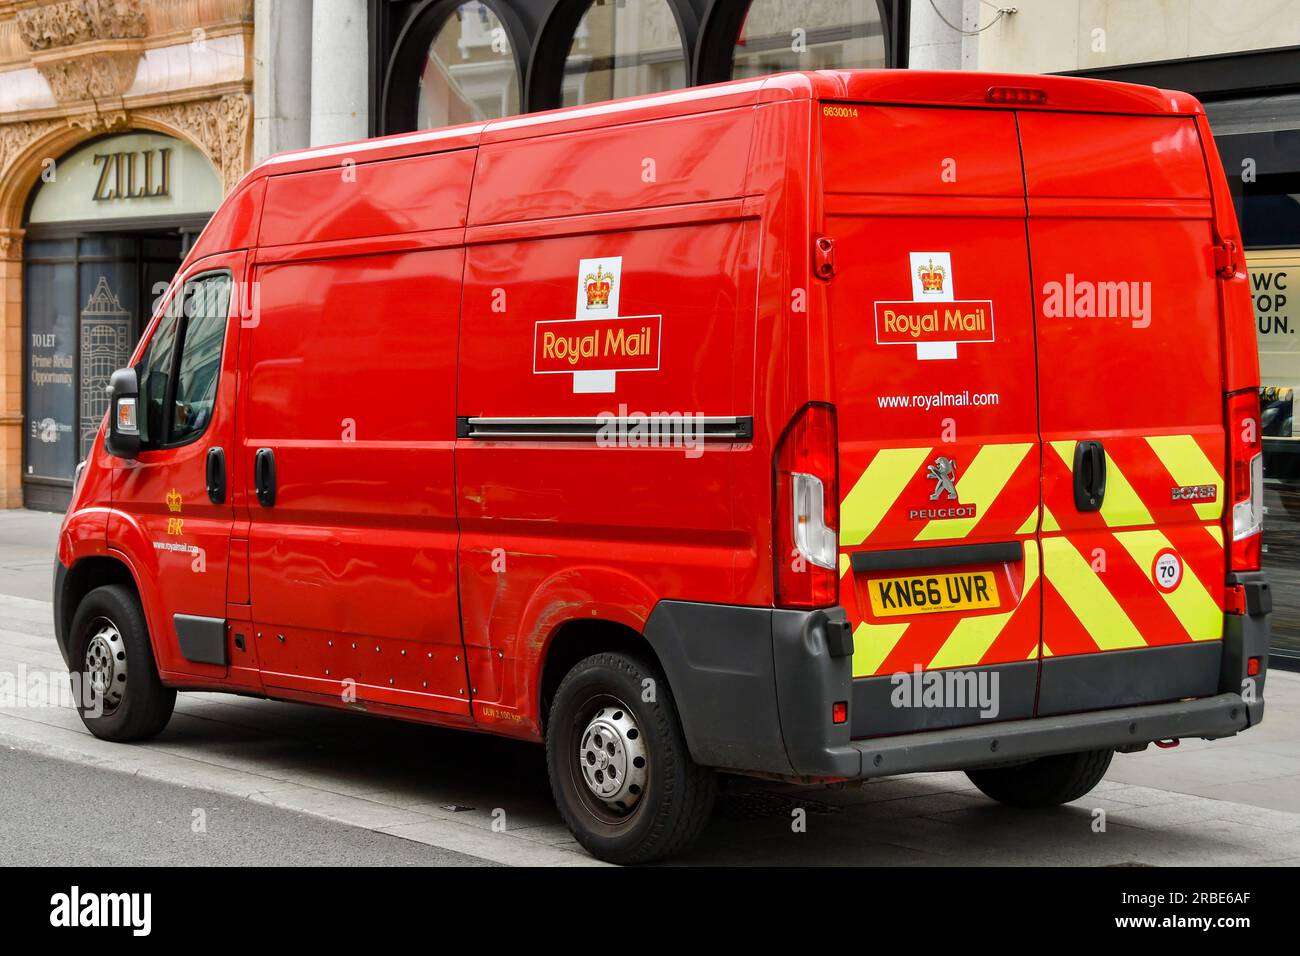 London, England, UK - 27 June 2023: Royal Mail delivery van parked on a street in central London. Stock Photo